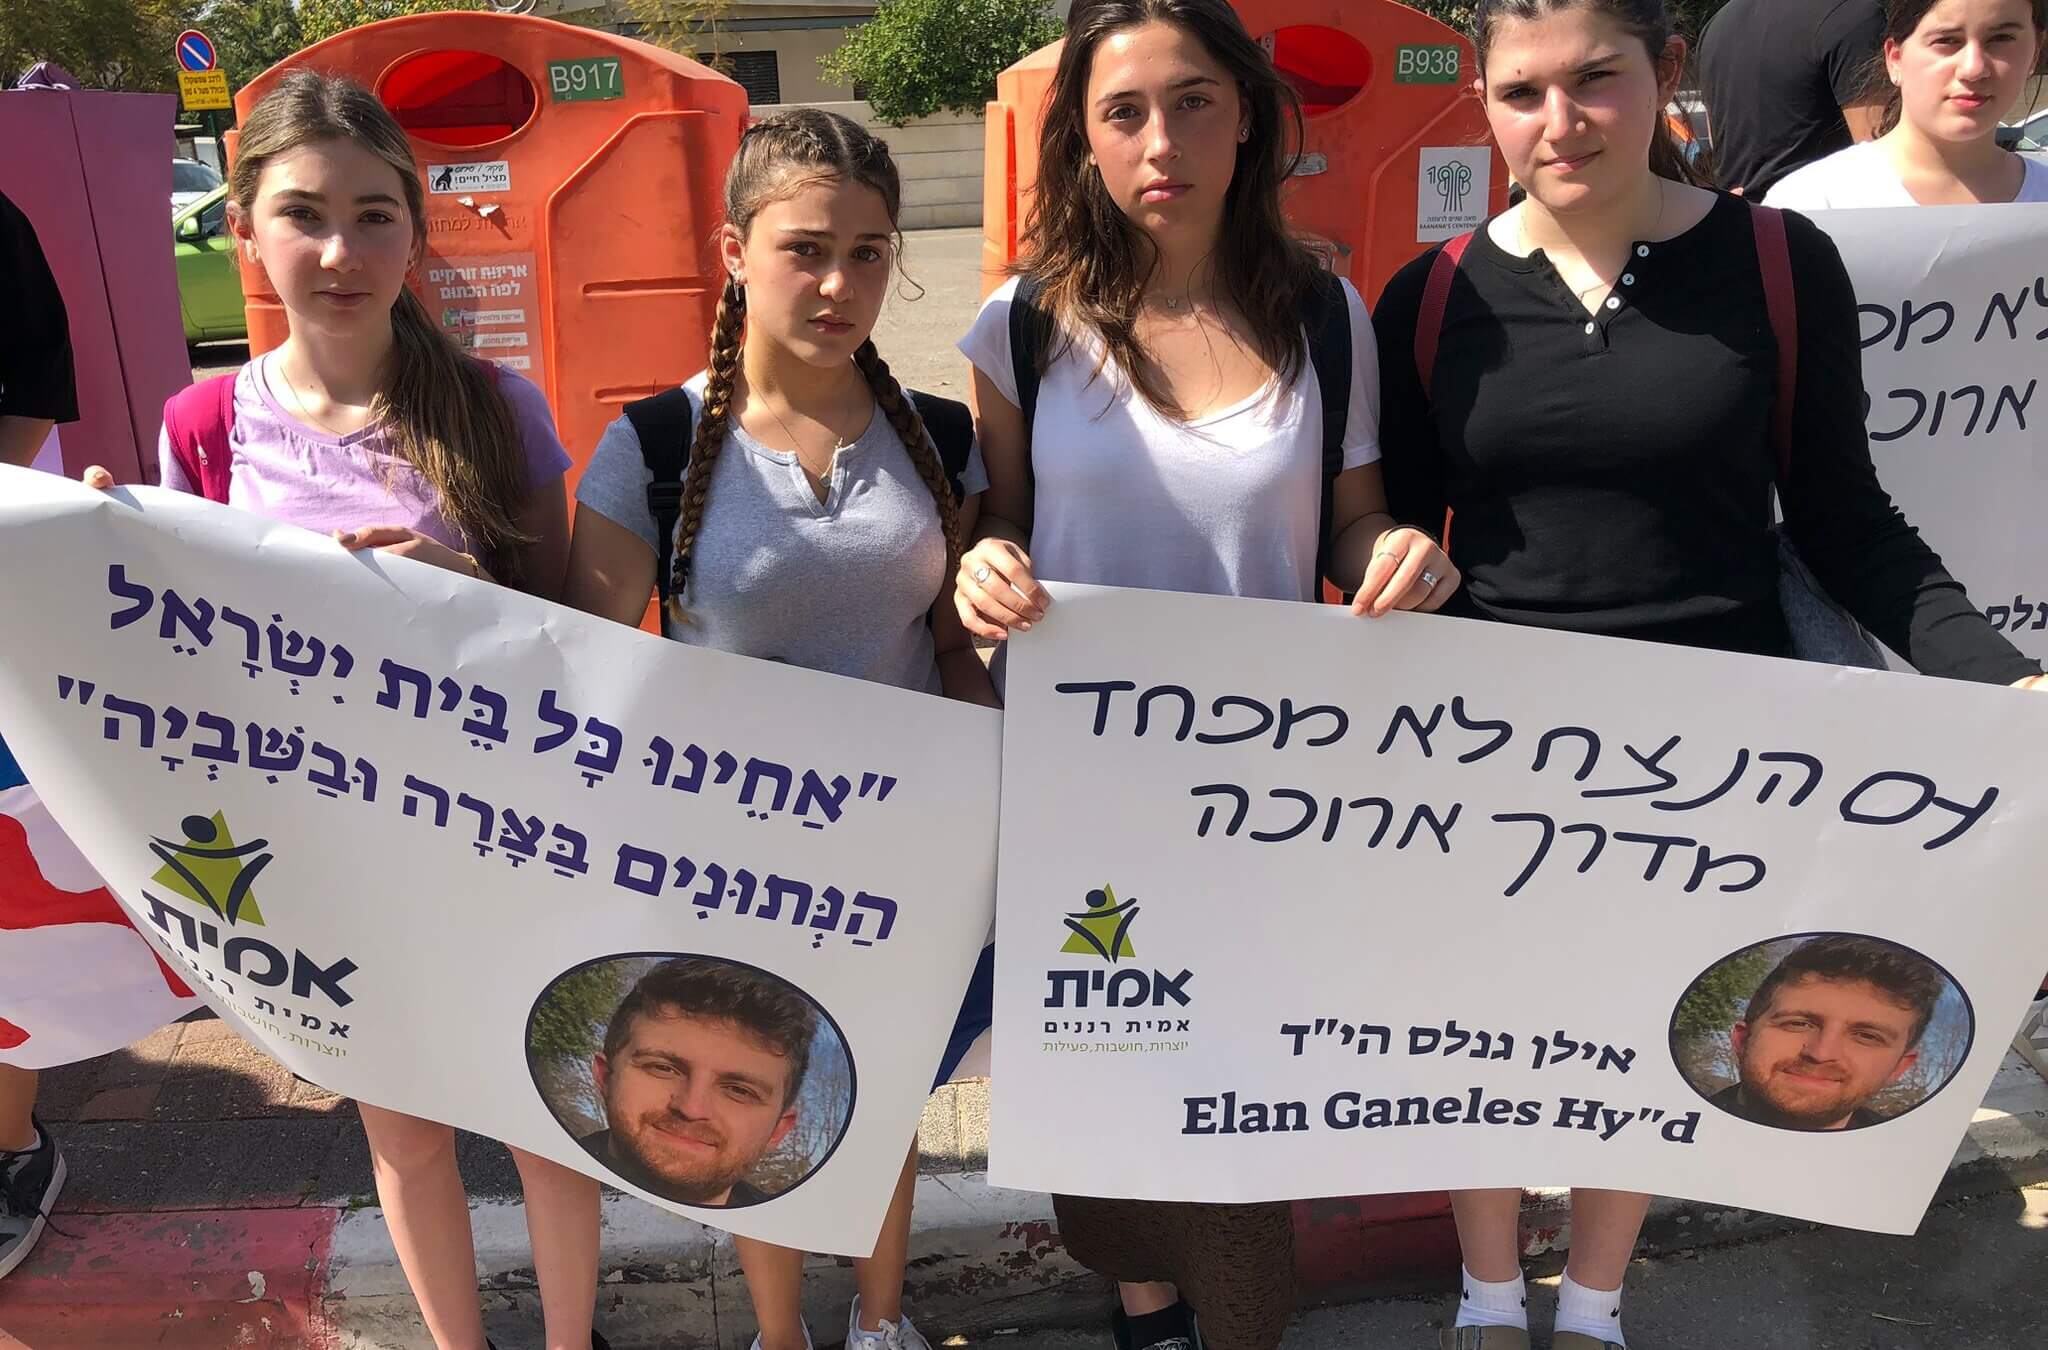 Maytal Weiser, second from right, in white shirt, 16, did not know Elan Ganeles but came to his funeral with friends to "support the family and show that the nation is one."